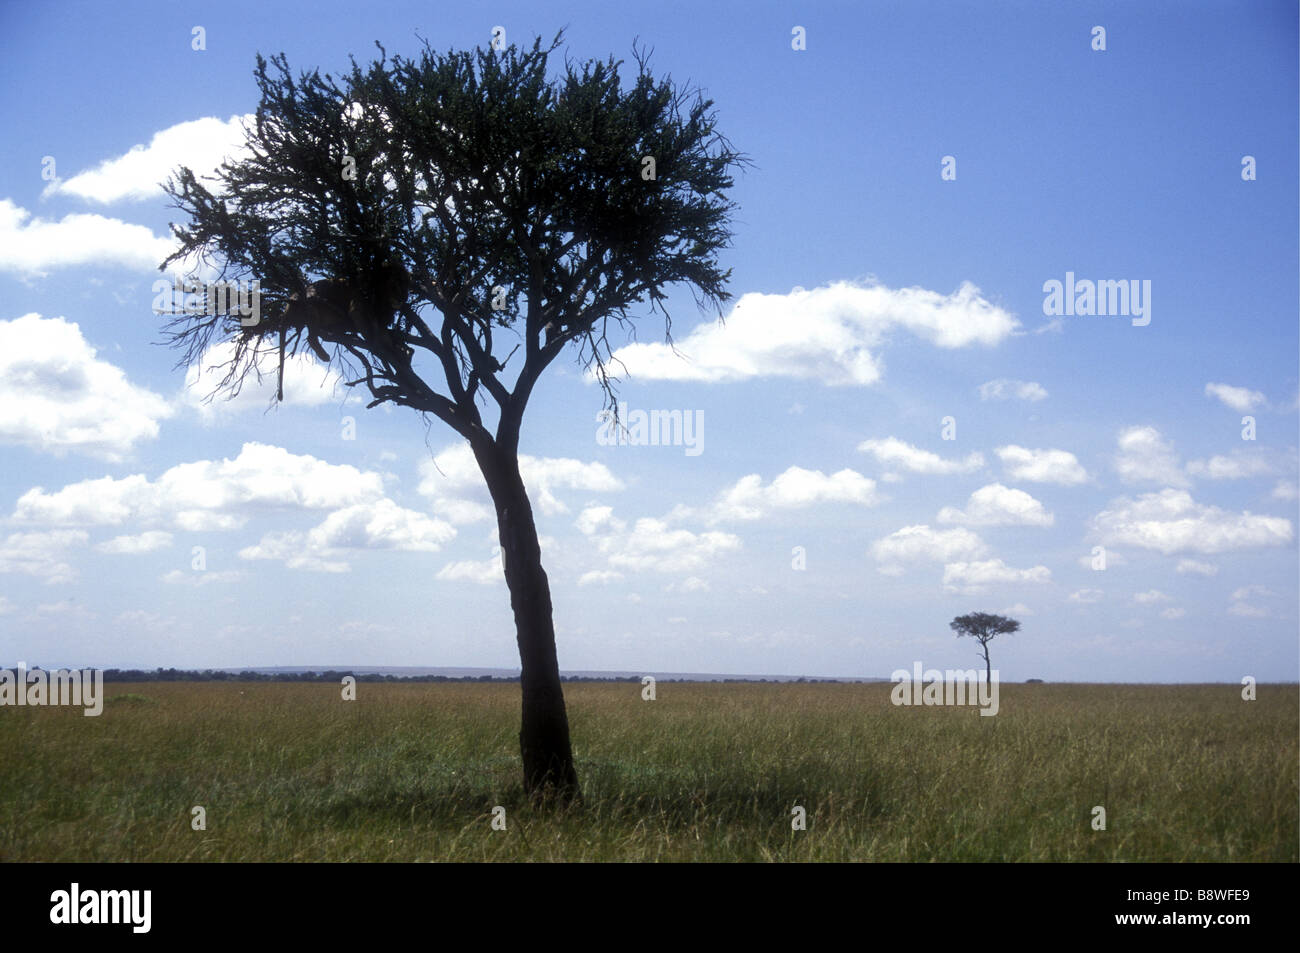 Balanites tree on open grass plains with mature male lion concealed in the canopy Masai Mara National Reserve Kenya East Africa Stock Photo